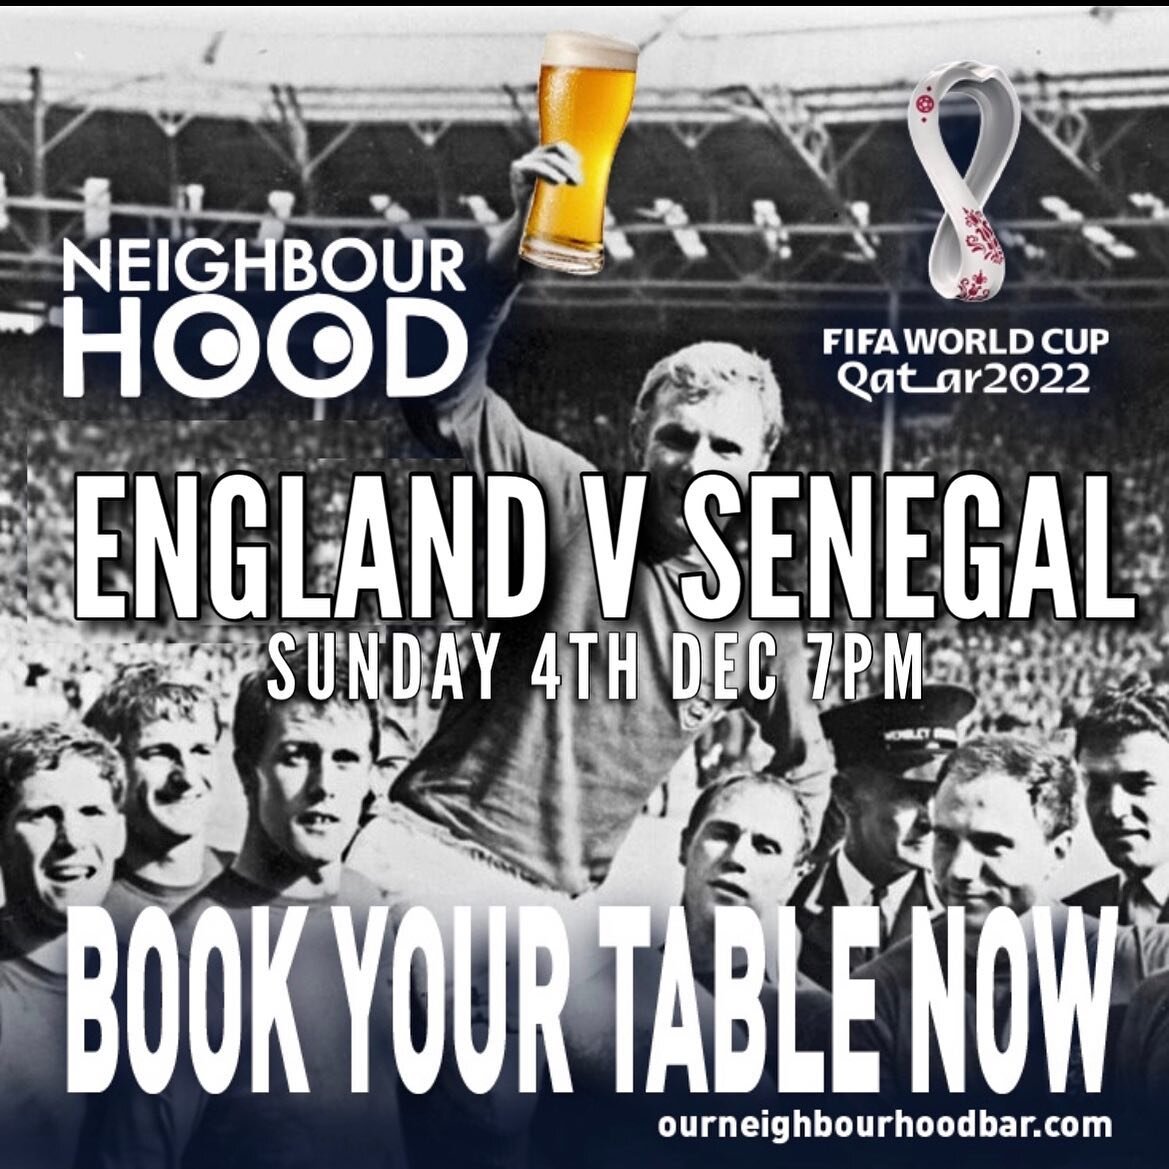 Pizza - Beer - Football - book your table now! 🍕🍺⚽️
.
.
.
.
.
.
.
.

#worldcup22qatar #wheretowatchthegame #englandfootball #happyhours #england🇬🇧 #watchingworldcupindidsbury #beers #cocktails #pizza #didsbury #manchester